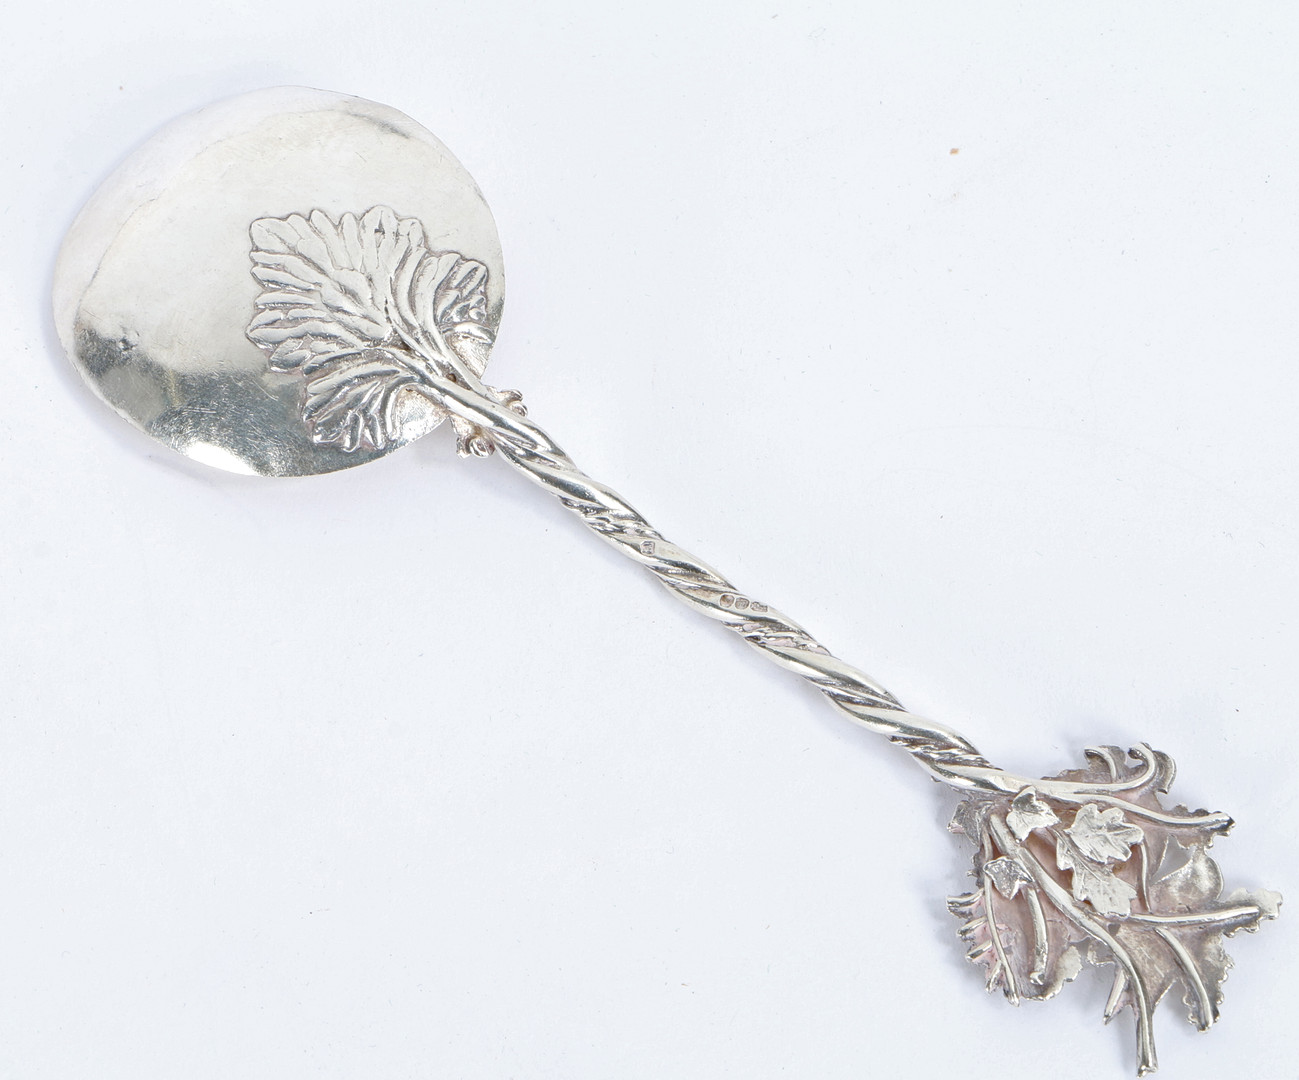 AN UNUSUAL SILVER NATURALISTIC CADDY SPOON. TWISTED STEM WITH FINIAL MODELLED AS A BIRD ATOP A NEST. - Image 2 of 2